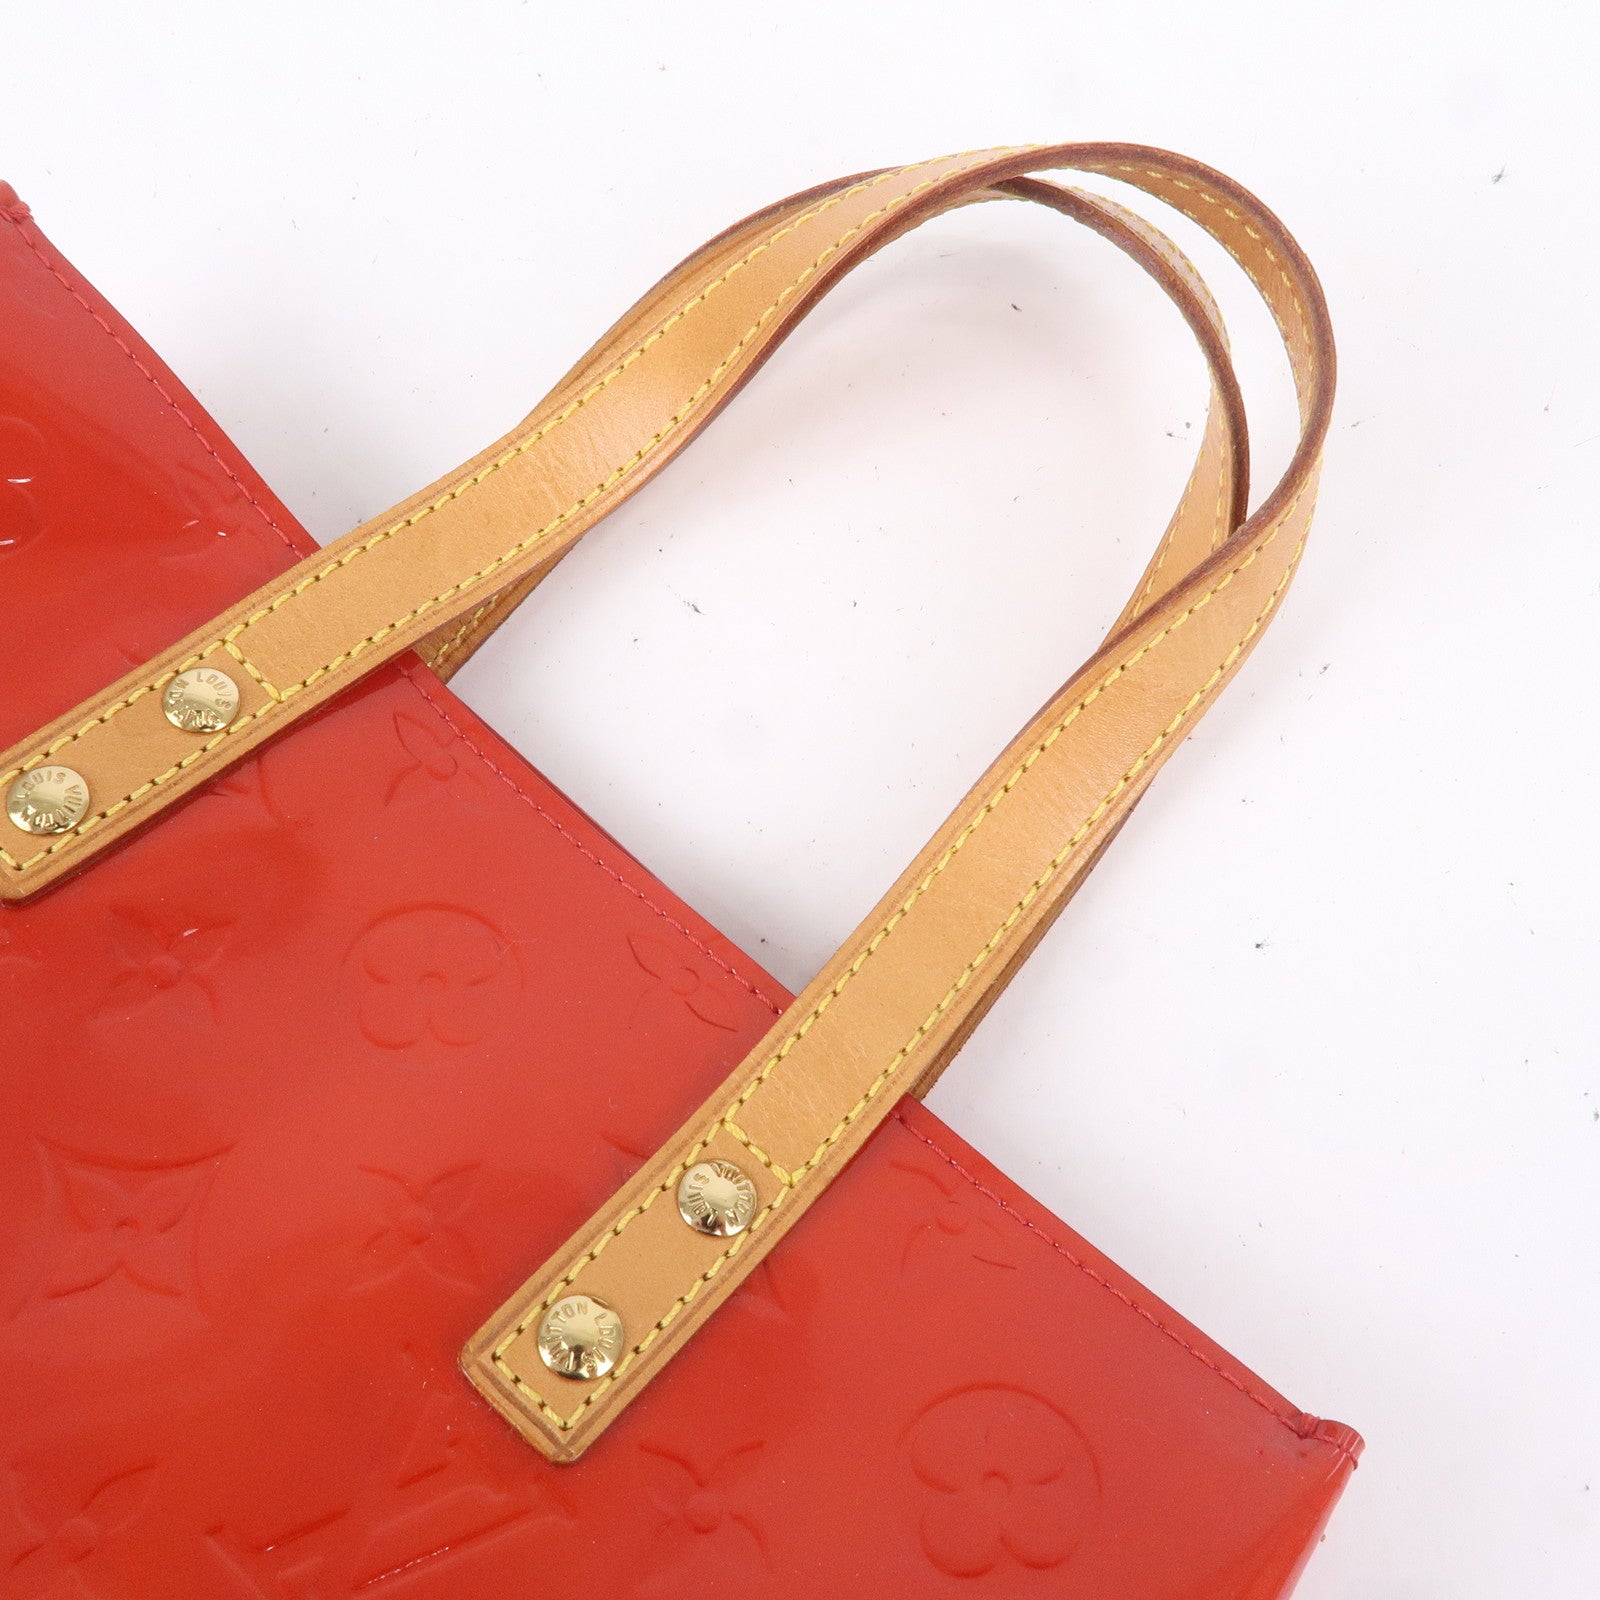 Louis Vuitton, Bags, Louis Vuitton Real Vernis Small Red Tote